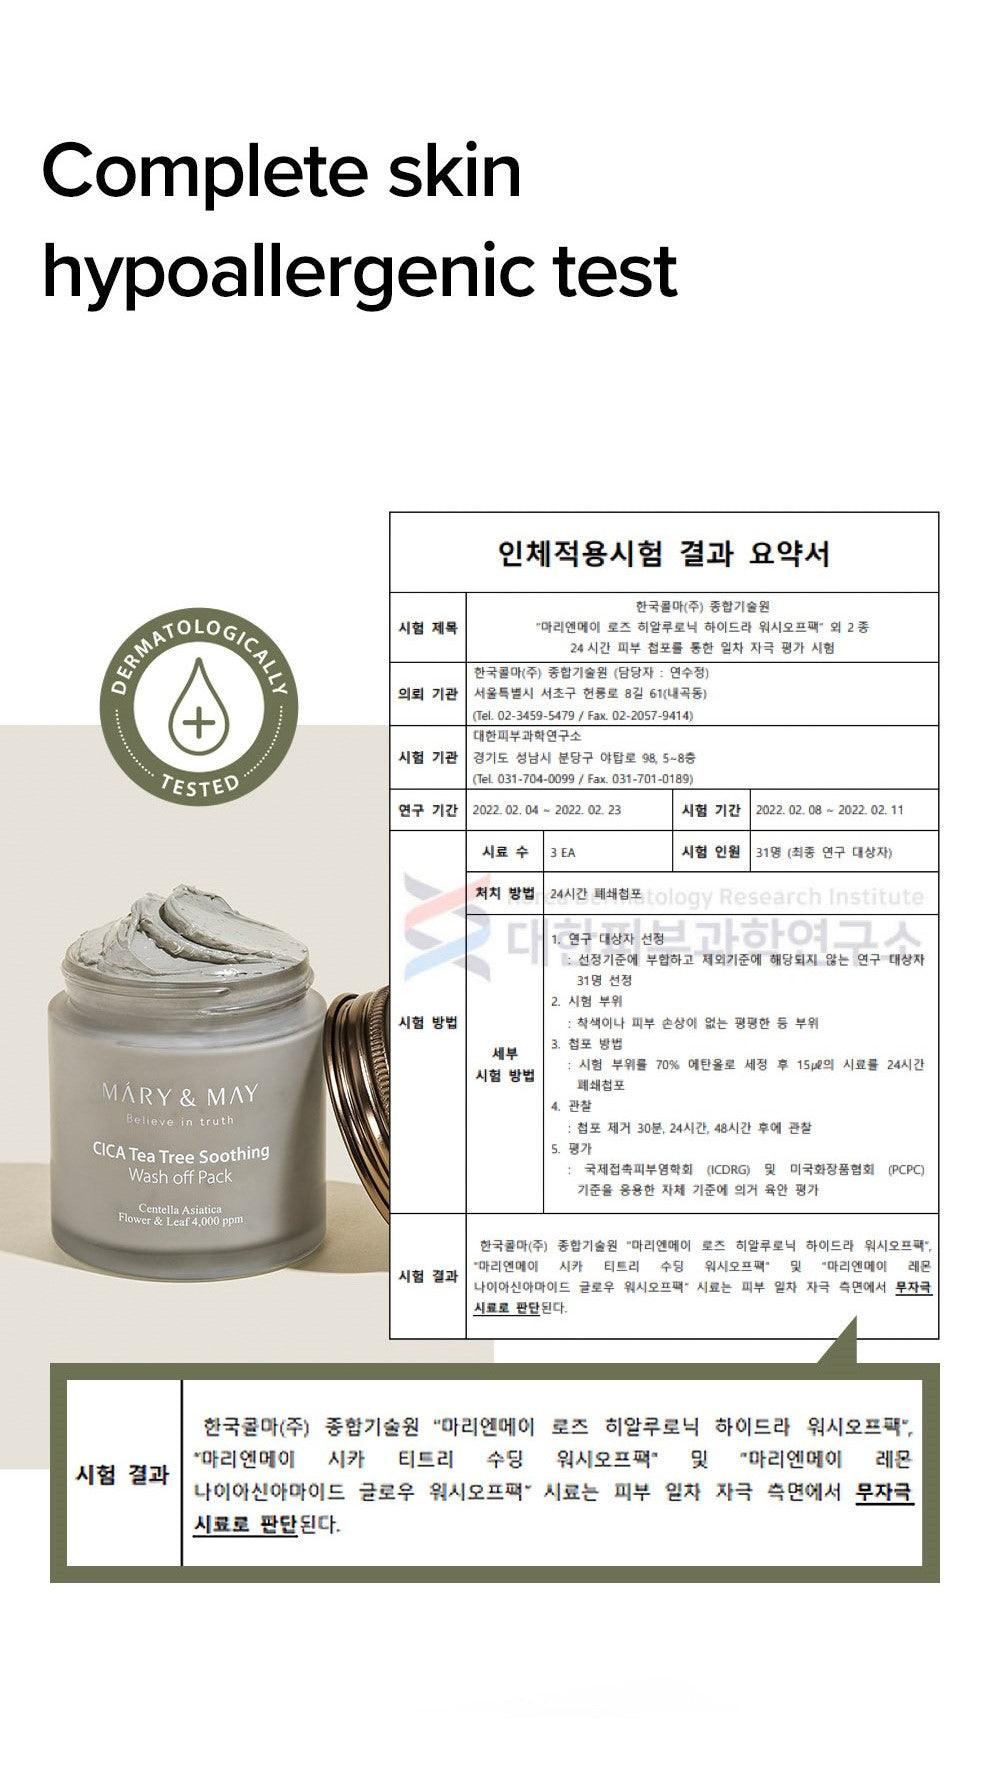 [MARY&MAY] Cica Tea Tree Soothing Vegan Wash Off Mask Pack 125g - KBeauti